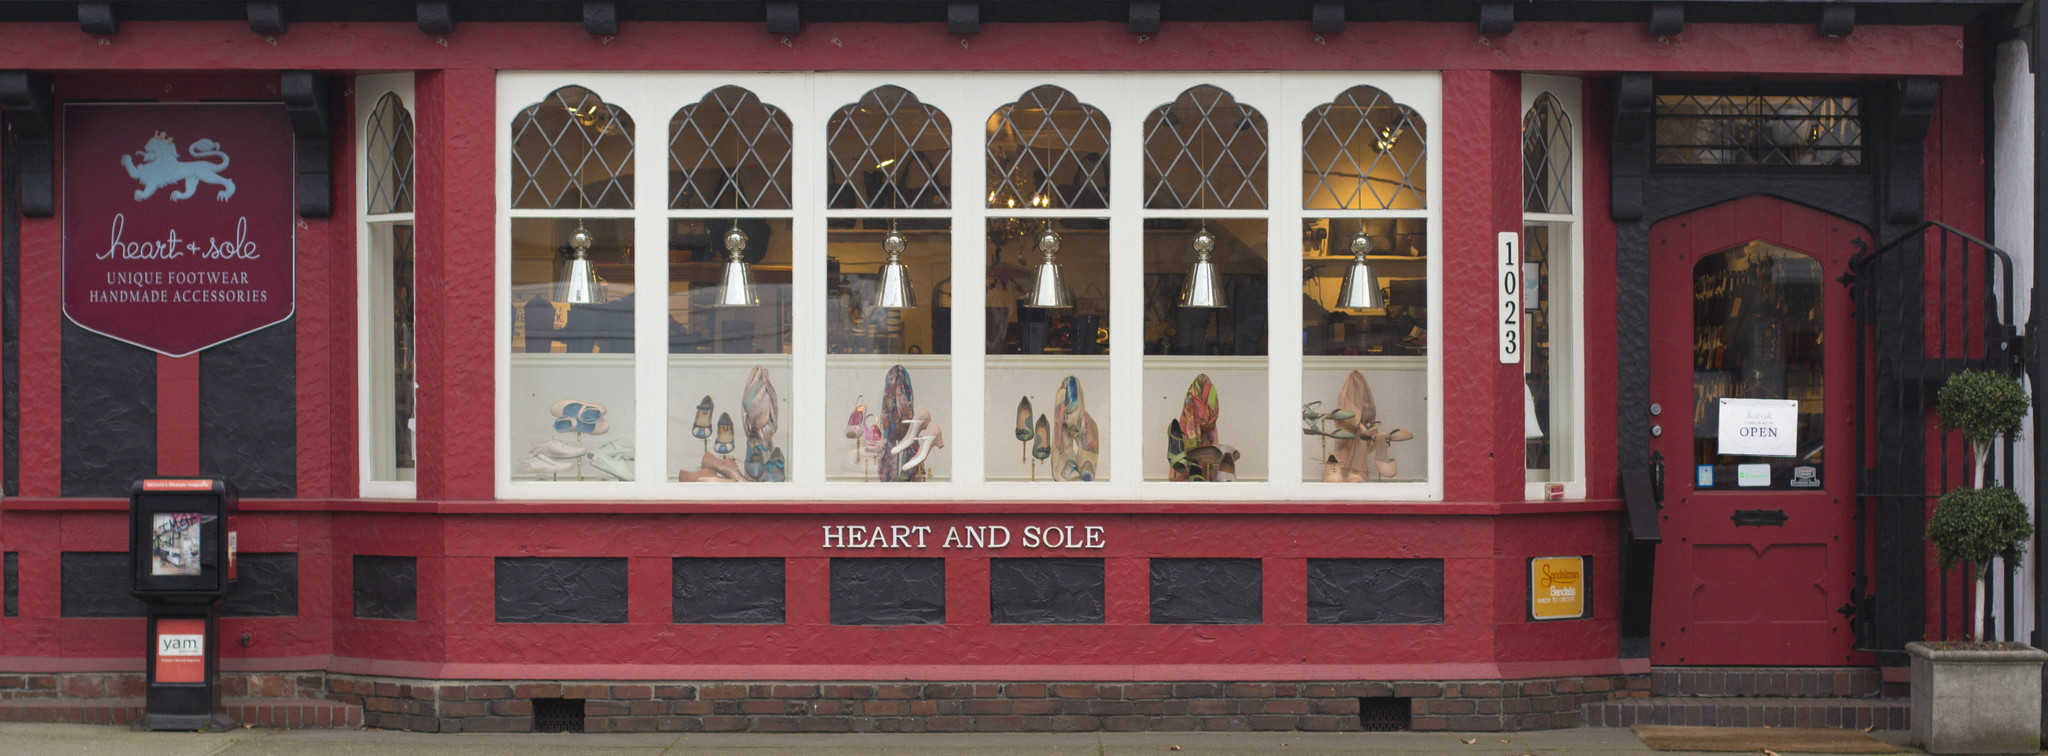 heart-sole-shoes-storefront